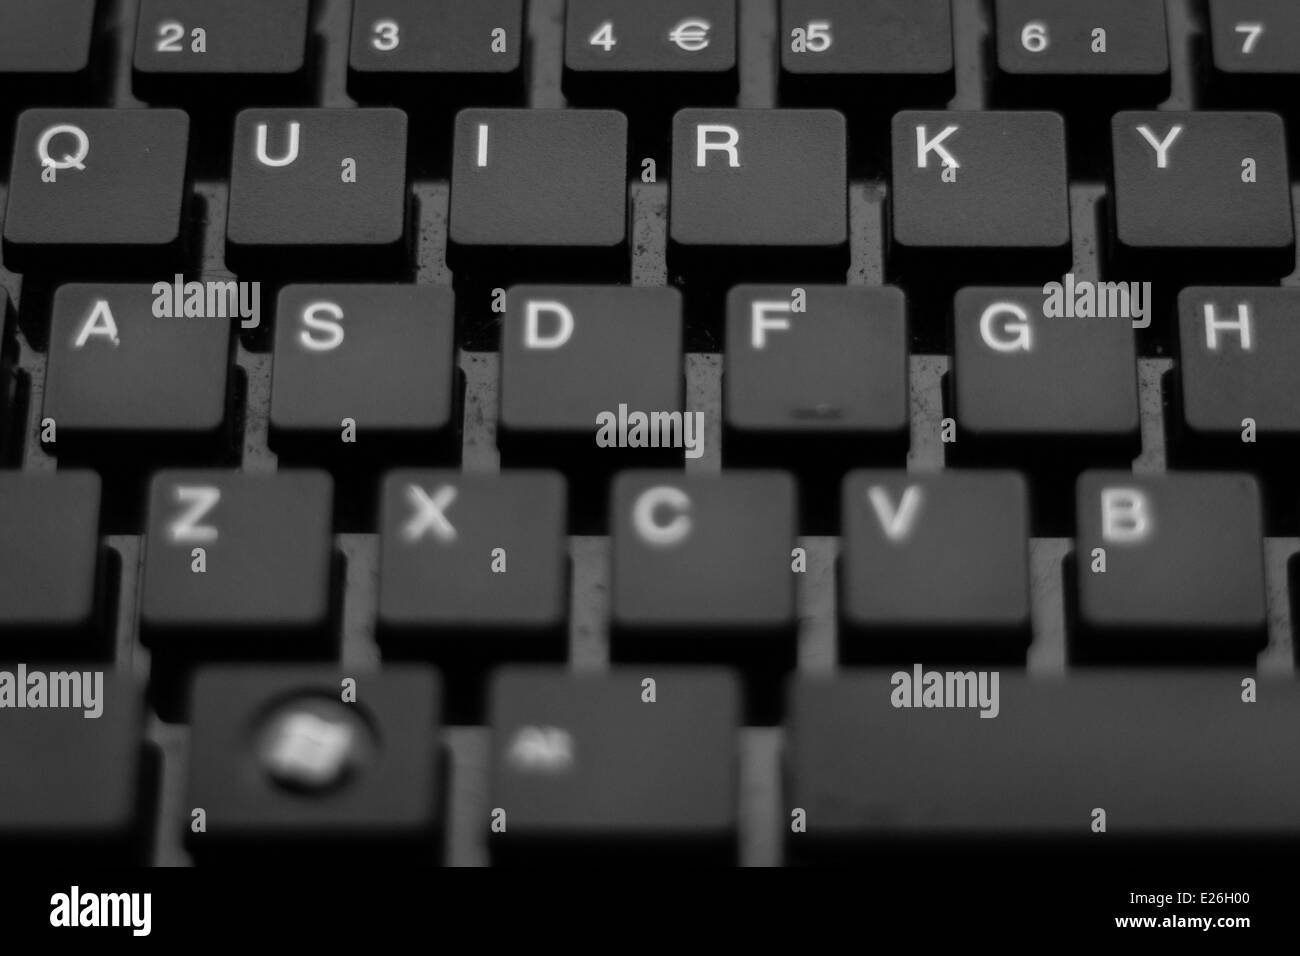 Rearranged letters on a keyboard spelling out the word "Quirky" where  usually the word "Qwerty" is seen Stock Photo - Alamy